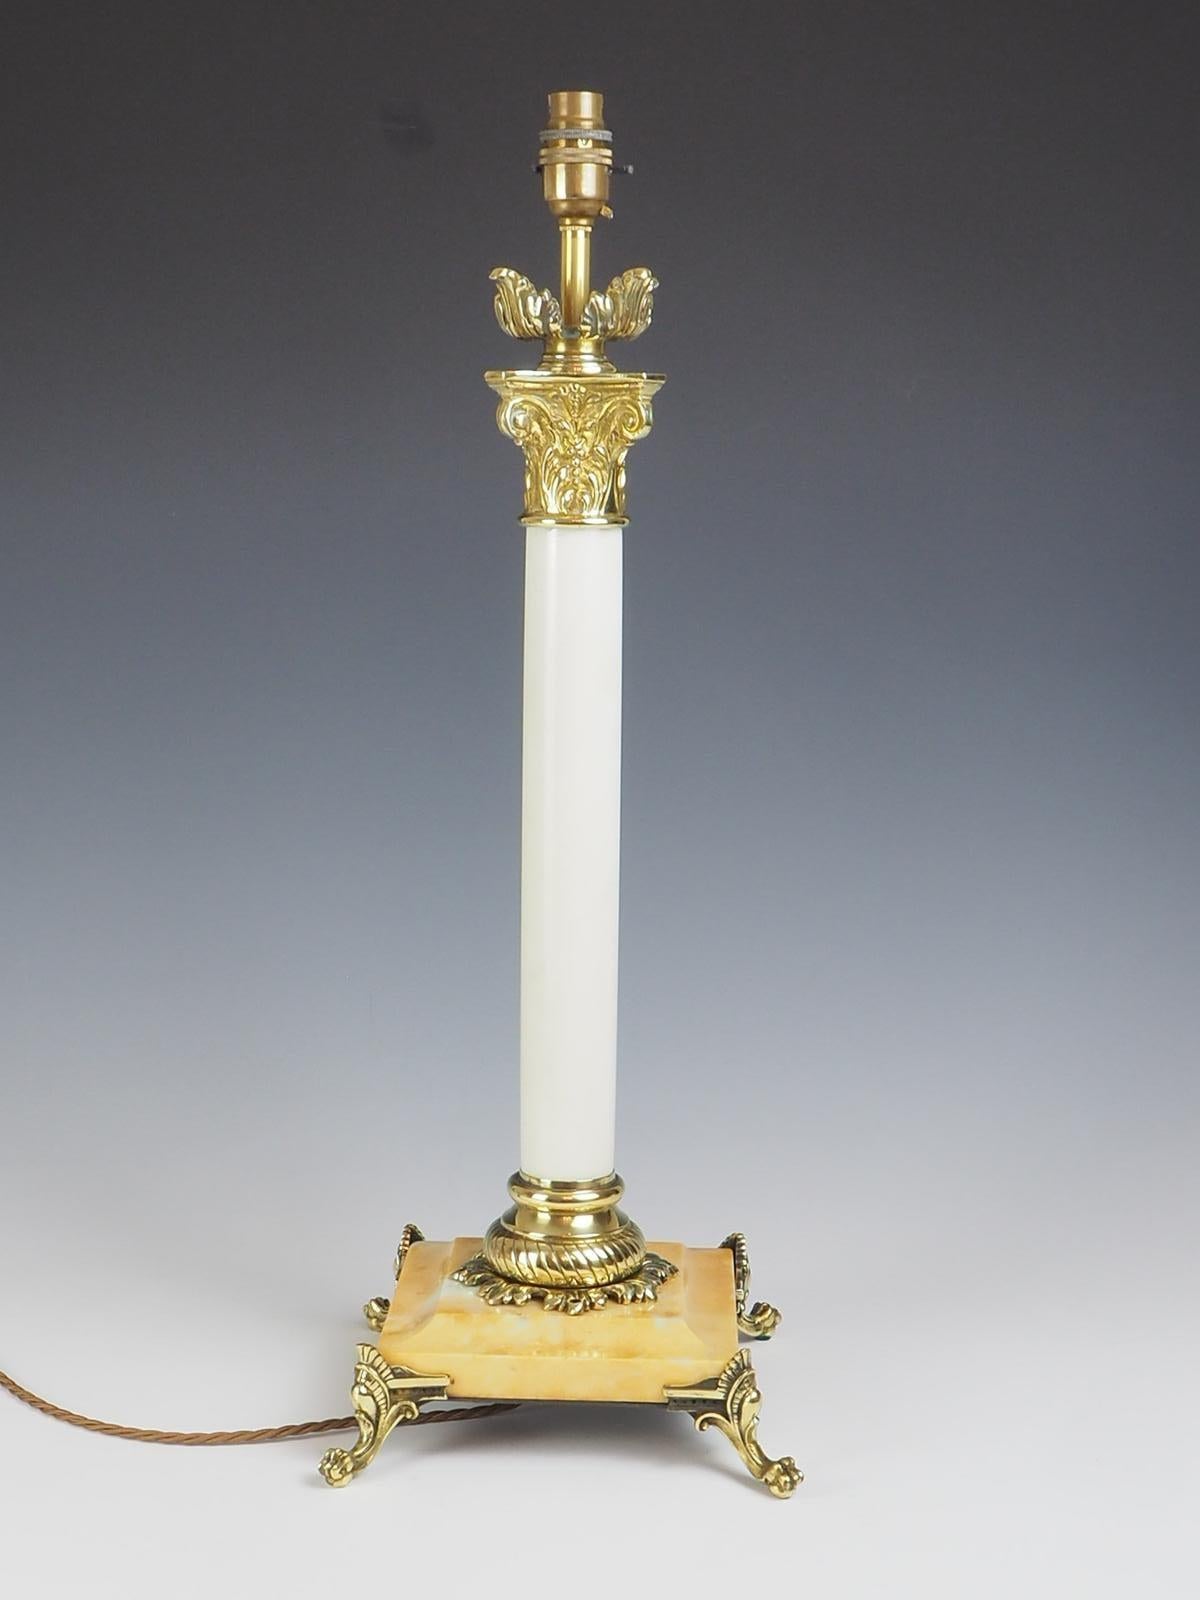 19th Century Brass and Marble Corinthian Table Lamp, a stunning blend of timeless elegance and exquisite craftsmanship. Crafted with a solid white marble column and a peach marble base, this lamp exudes sophistication.

The lamp stands gracefully on